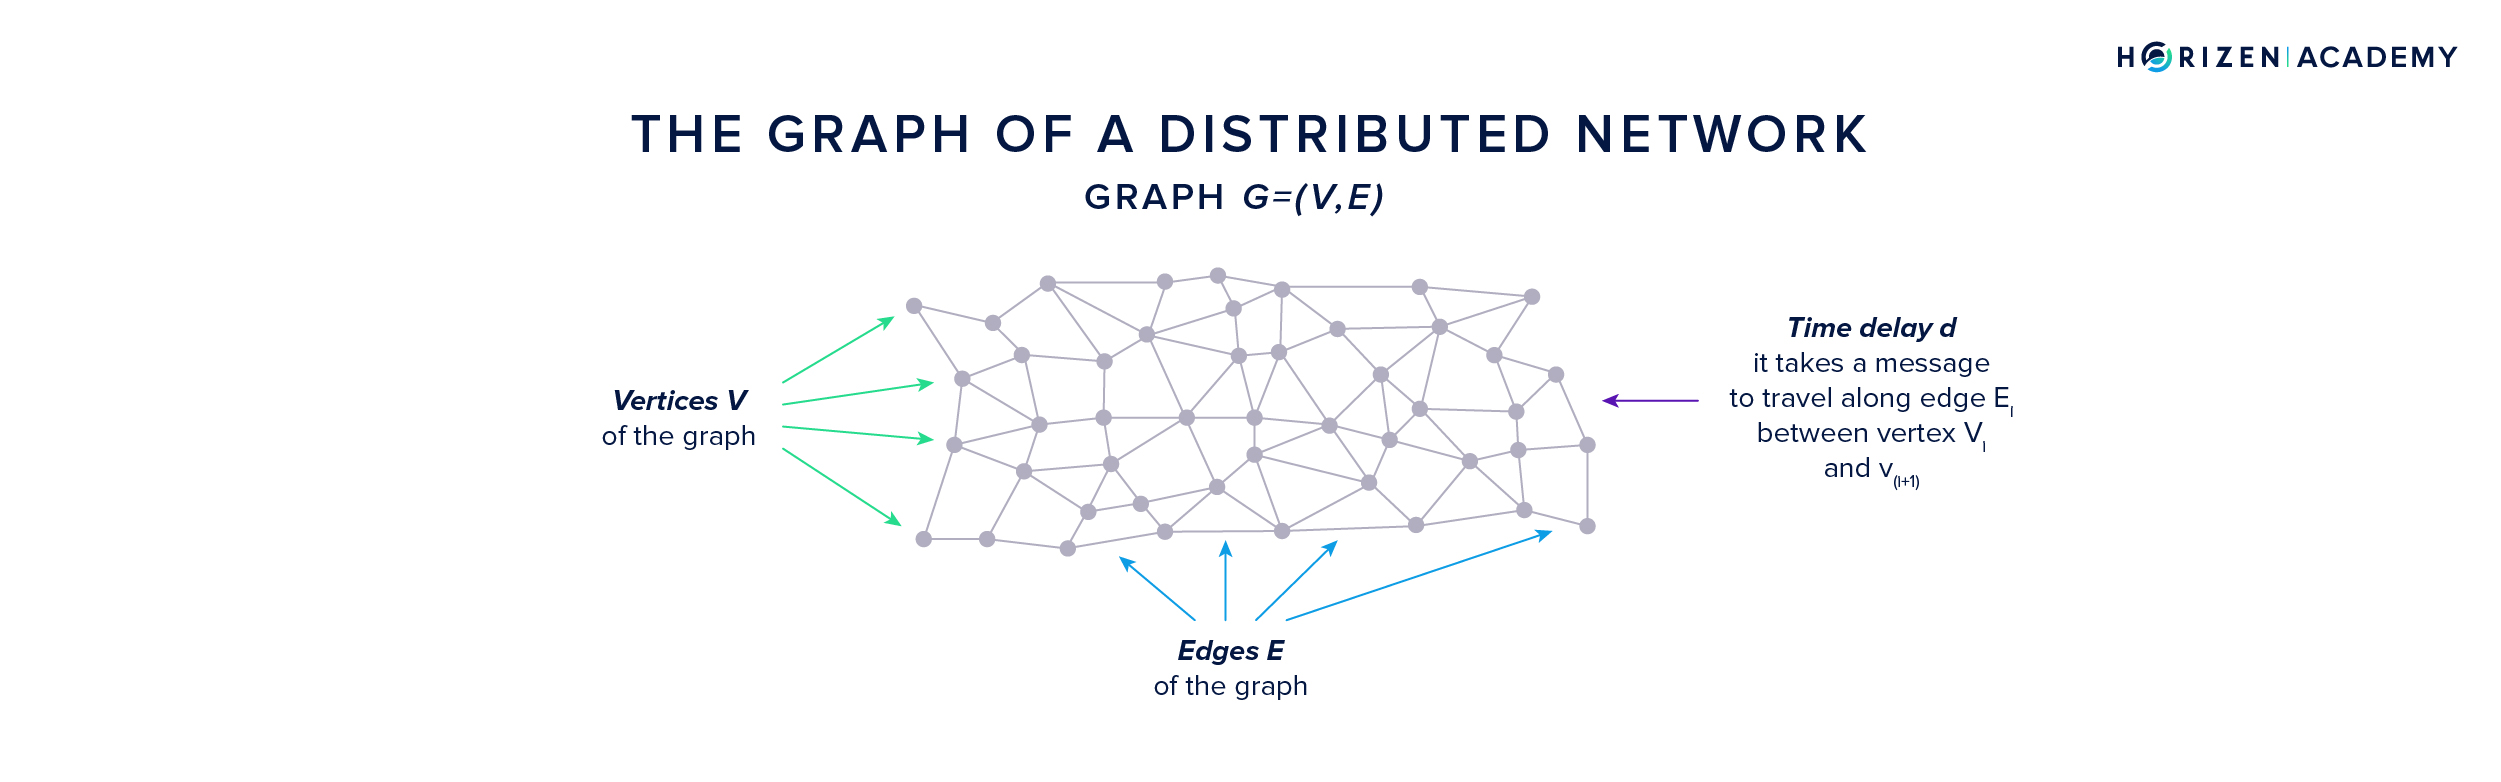 The Graph of a Distributed Peer-2-Peer (P2P) Network